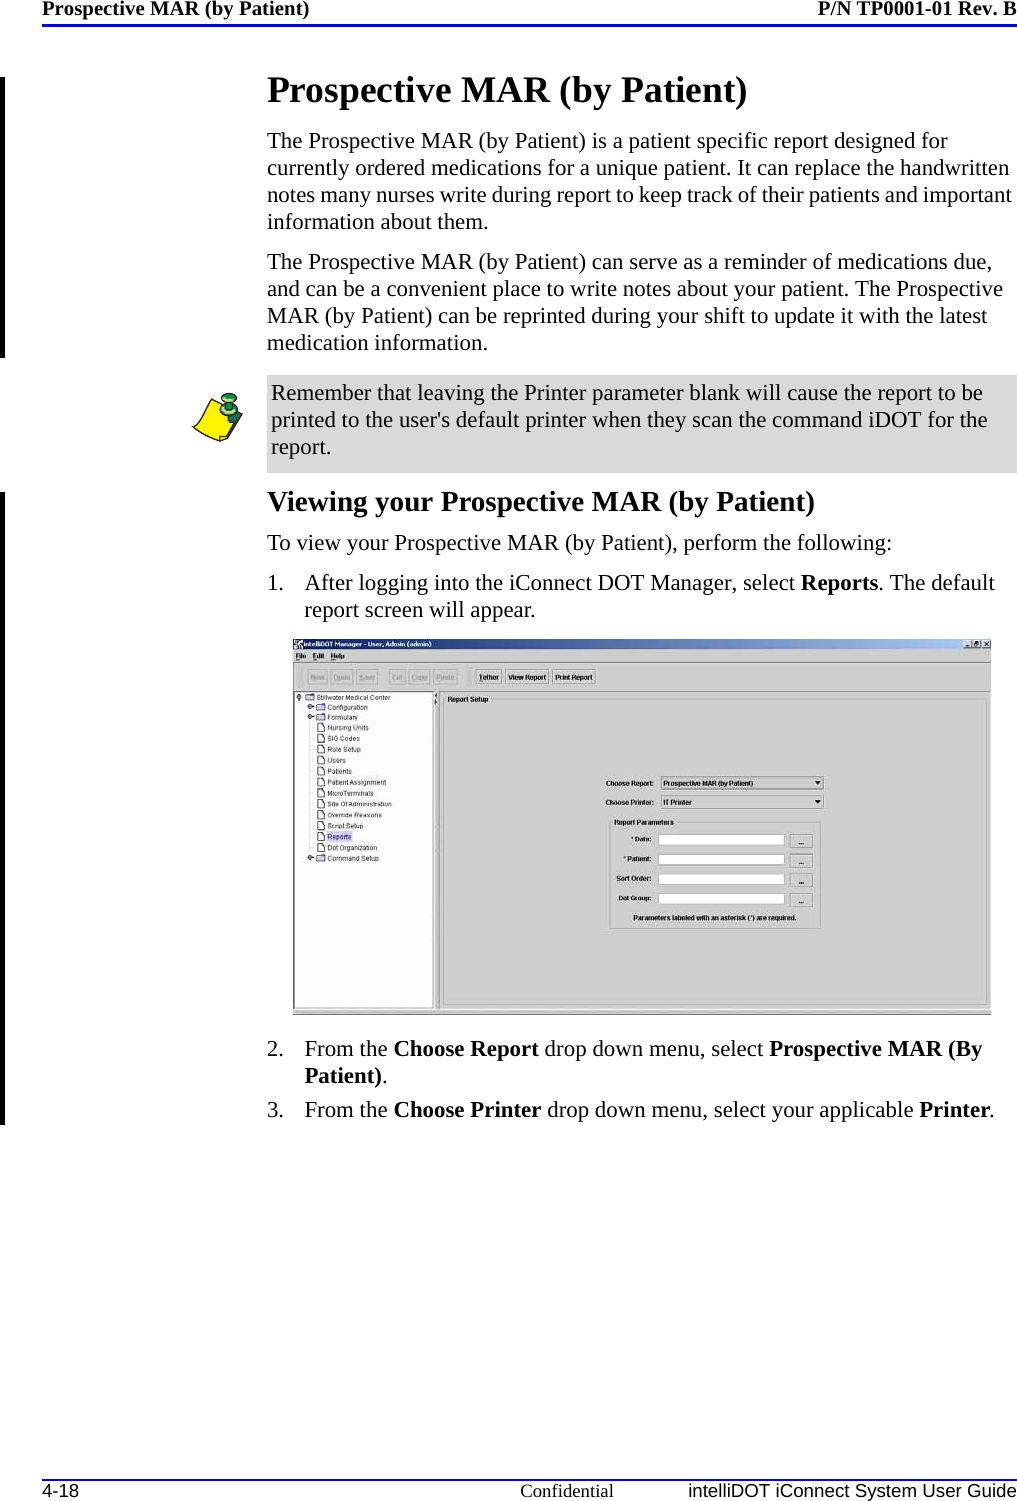 Prospective MAR (by Patient) P/N TP0001-01 Rev. B4-18 Confidential intelliDOT iConnect System User GuideProspective MAR (by Patient)The Prospective MAR (by Patient) is a patient specific report designed for currently ordered medications for a unique patient. It can replace the handwritten notes many nurses write during report to keep track of their patients and important information about them. The Prospective MAR (by Patient) can serve as a reminder of medications due, and can be a convenient place to write notes about your patient. The Prospective MAR (by Patient) can be reprinted during your shift to update it with the latest medication information.Viewing your Prospective MAR (by Patient)To view your Prospective MAR (by Patient), perform the following:1. After logging into the iConnect DOT Manager, select Reports. The default report screen will appear.2. From the Choose Report drop down menu, select Prospective MAR (By Patient).3. From the Choose Printer drop down menu, select your applicable Printer.Remember that leaving the Printer parameter blank will cause the report to be printed to the user&apos;s default printer when they scan the command iDOT for the report. 